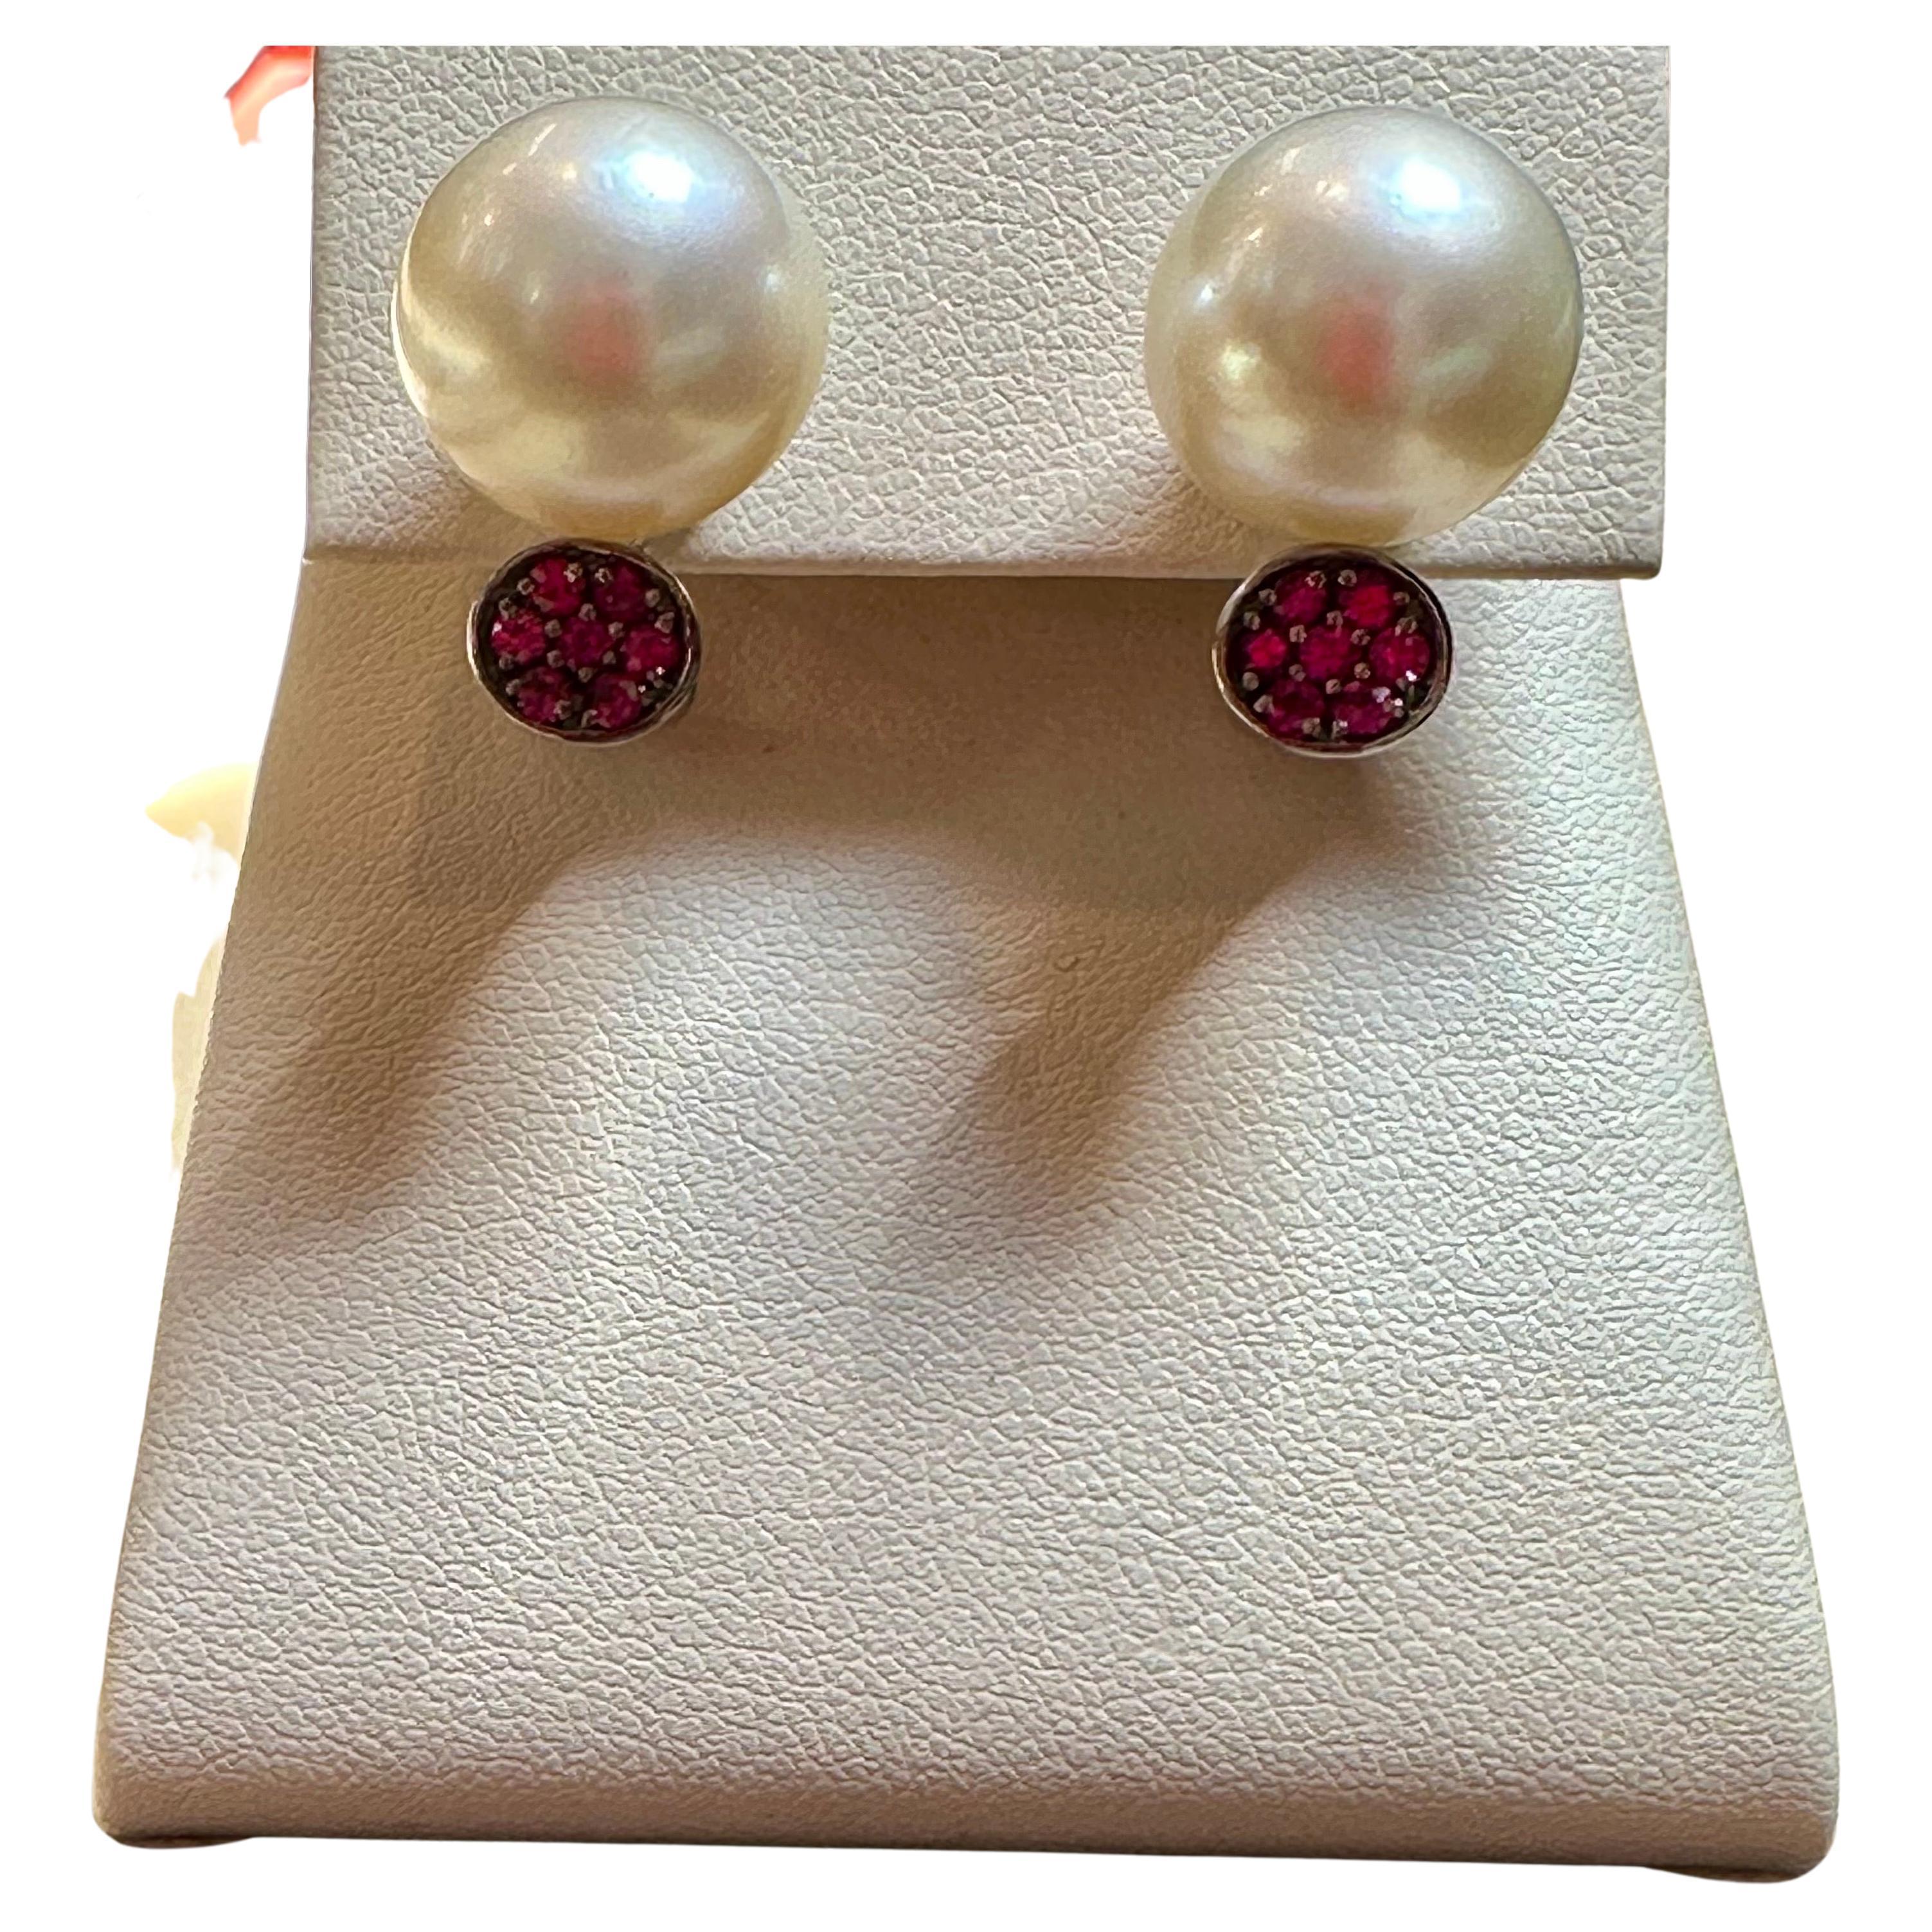 Presenting the exquisite 14mm Round South Sea Pearl & Ruby Cocktail Stud Earrings, a magnificent estate piece. These captivating earrings are crafted from 18 Karat white gold, showcasing a timeless beauty. 

Each earring features a lustrous South